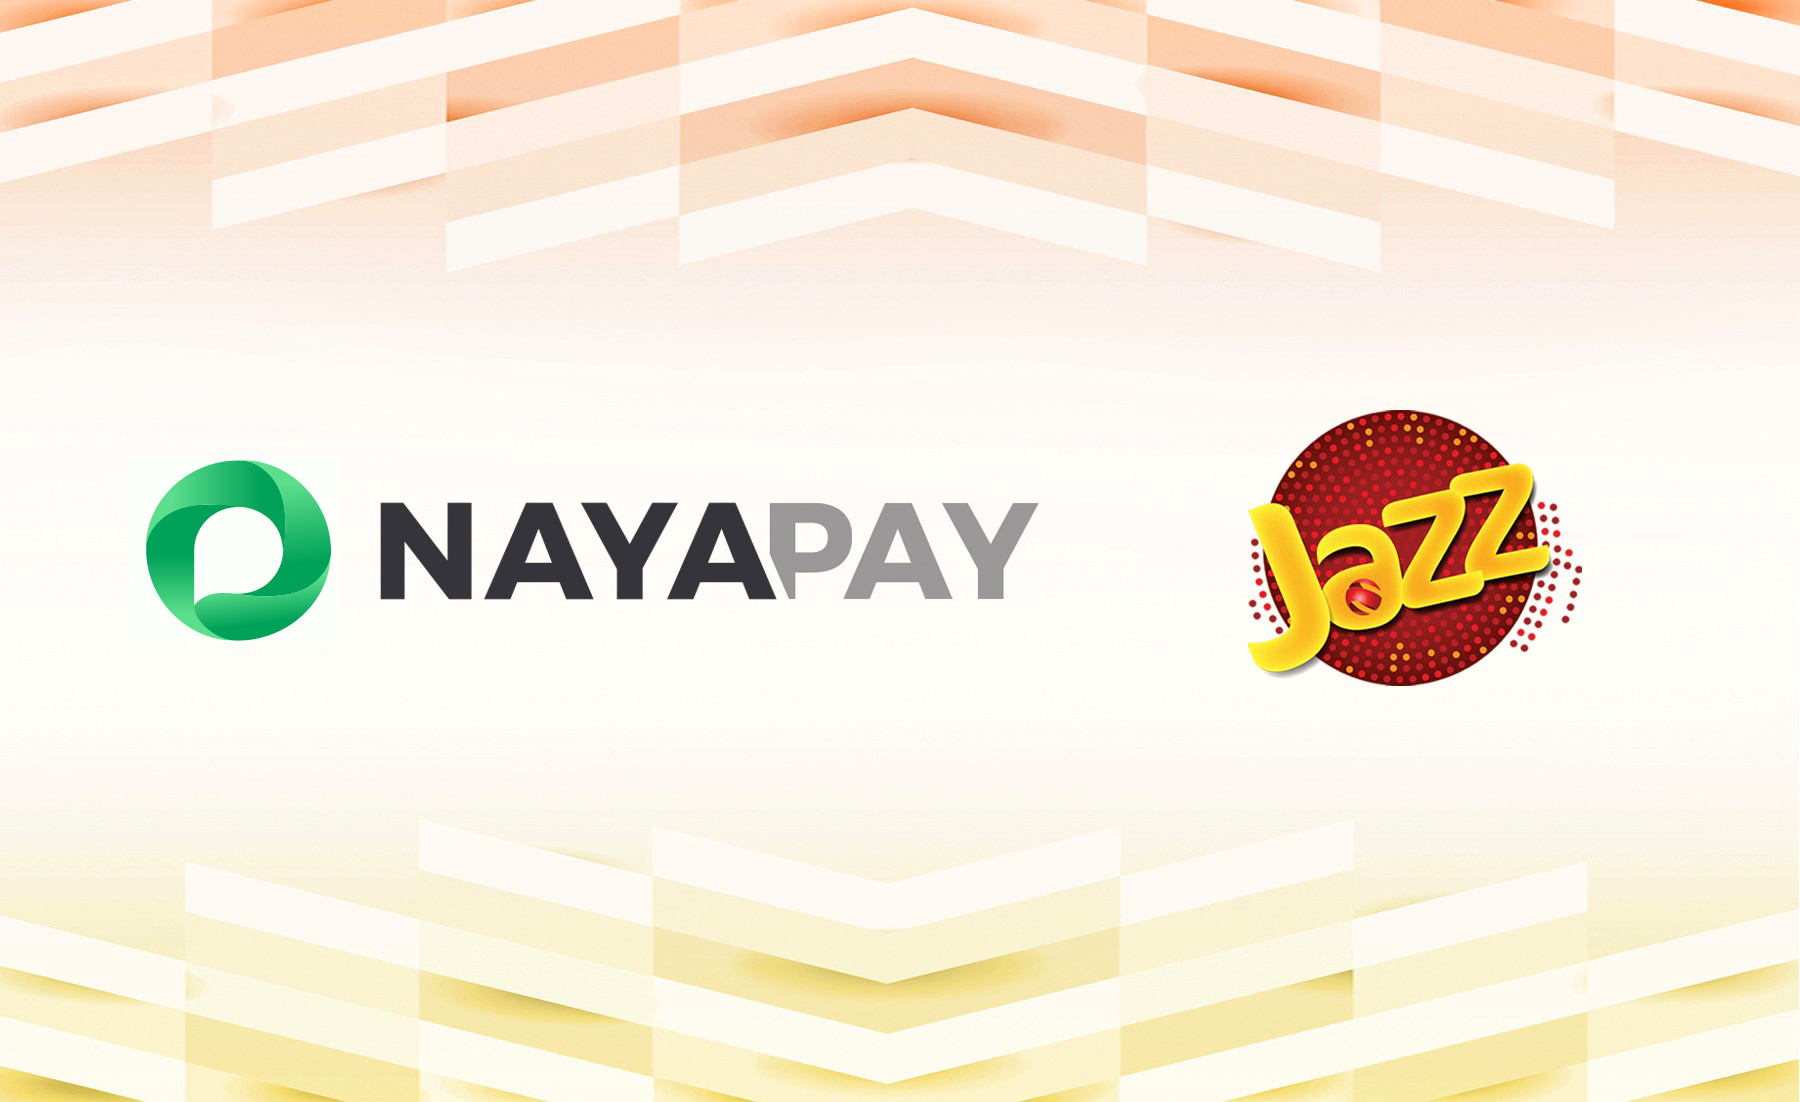 Jazz and NayaPay team up for digitization of payments